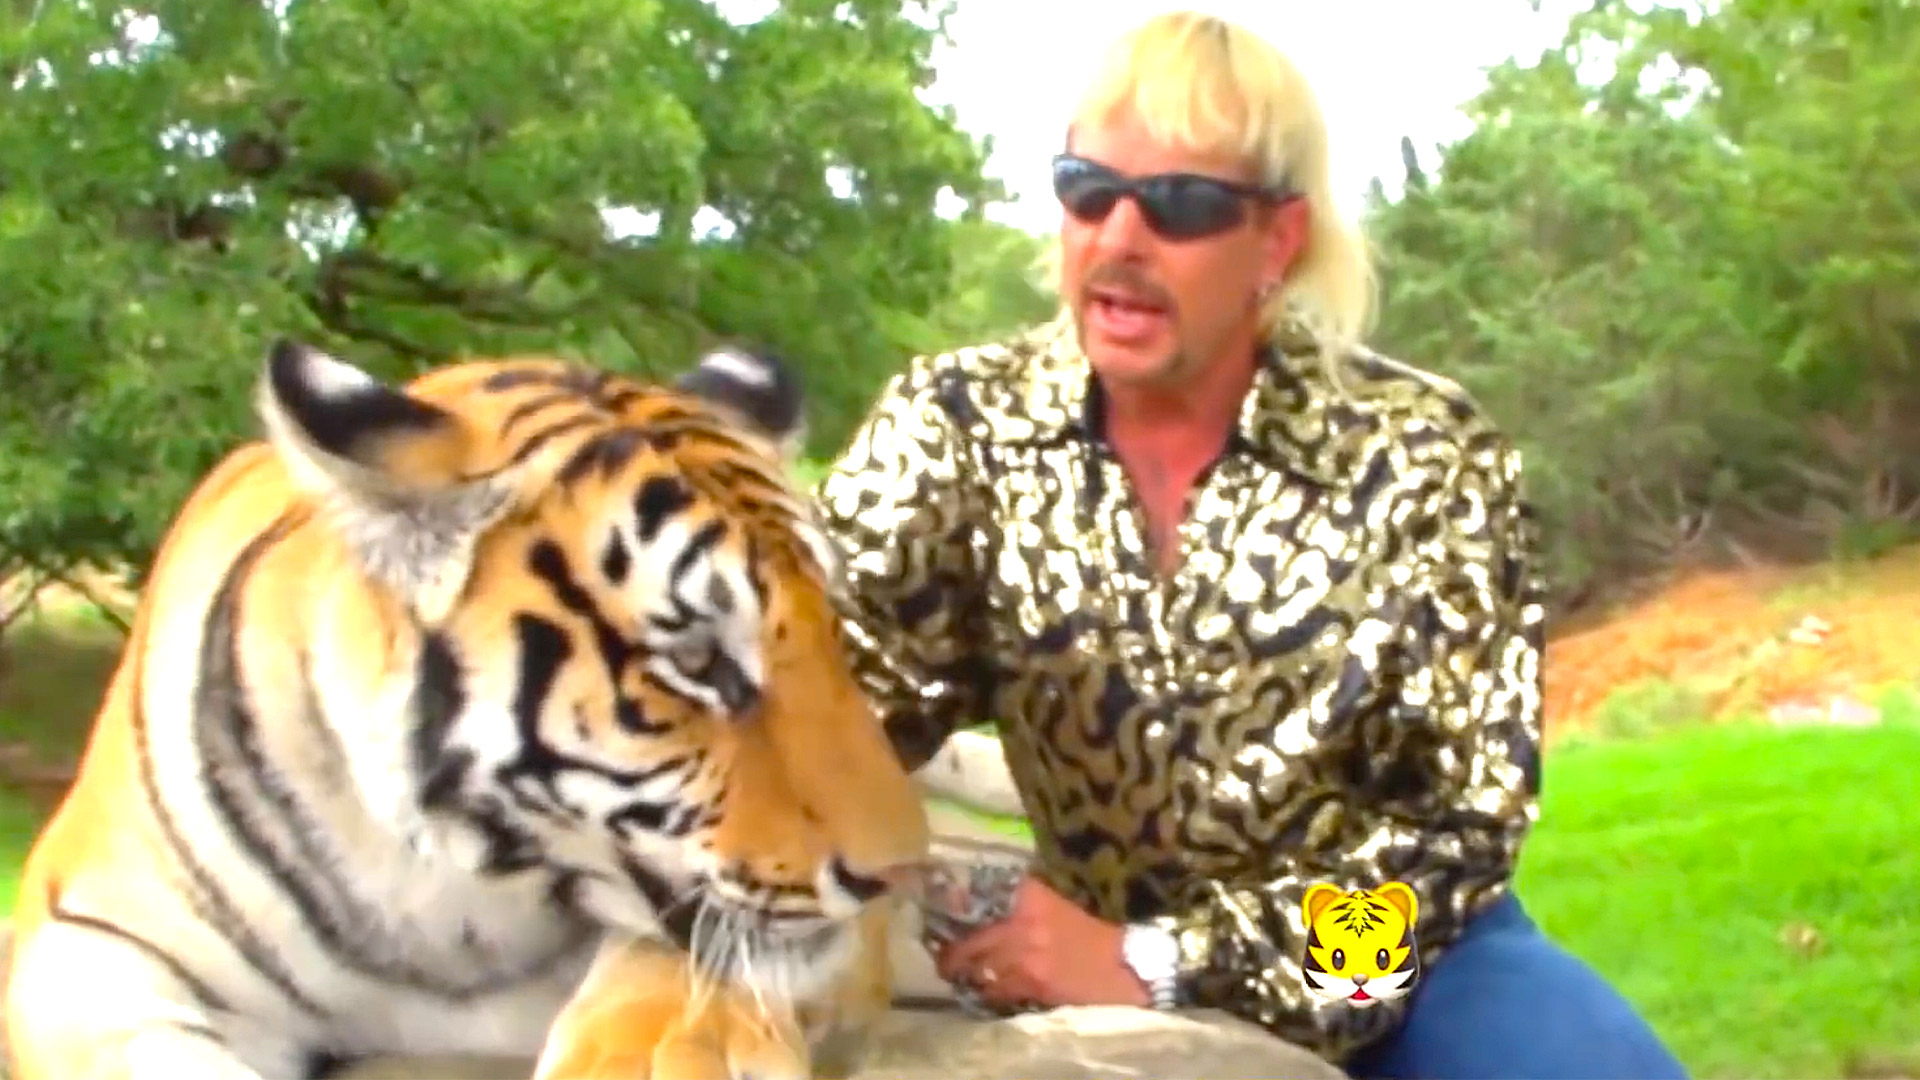 Tiger King "I Saw A Tiger" Music Video by Joe Exotic